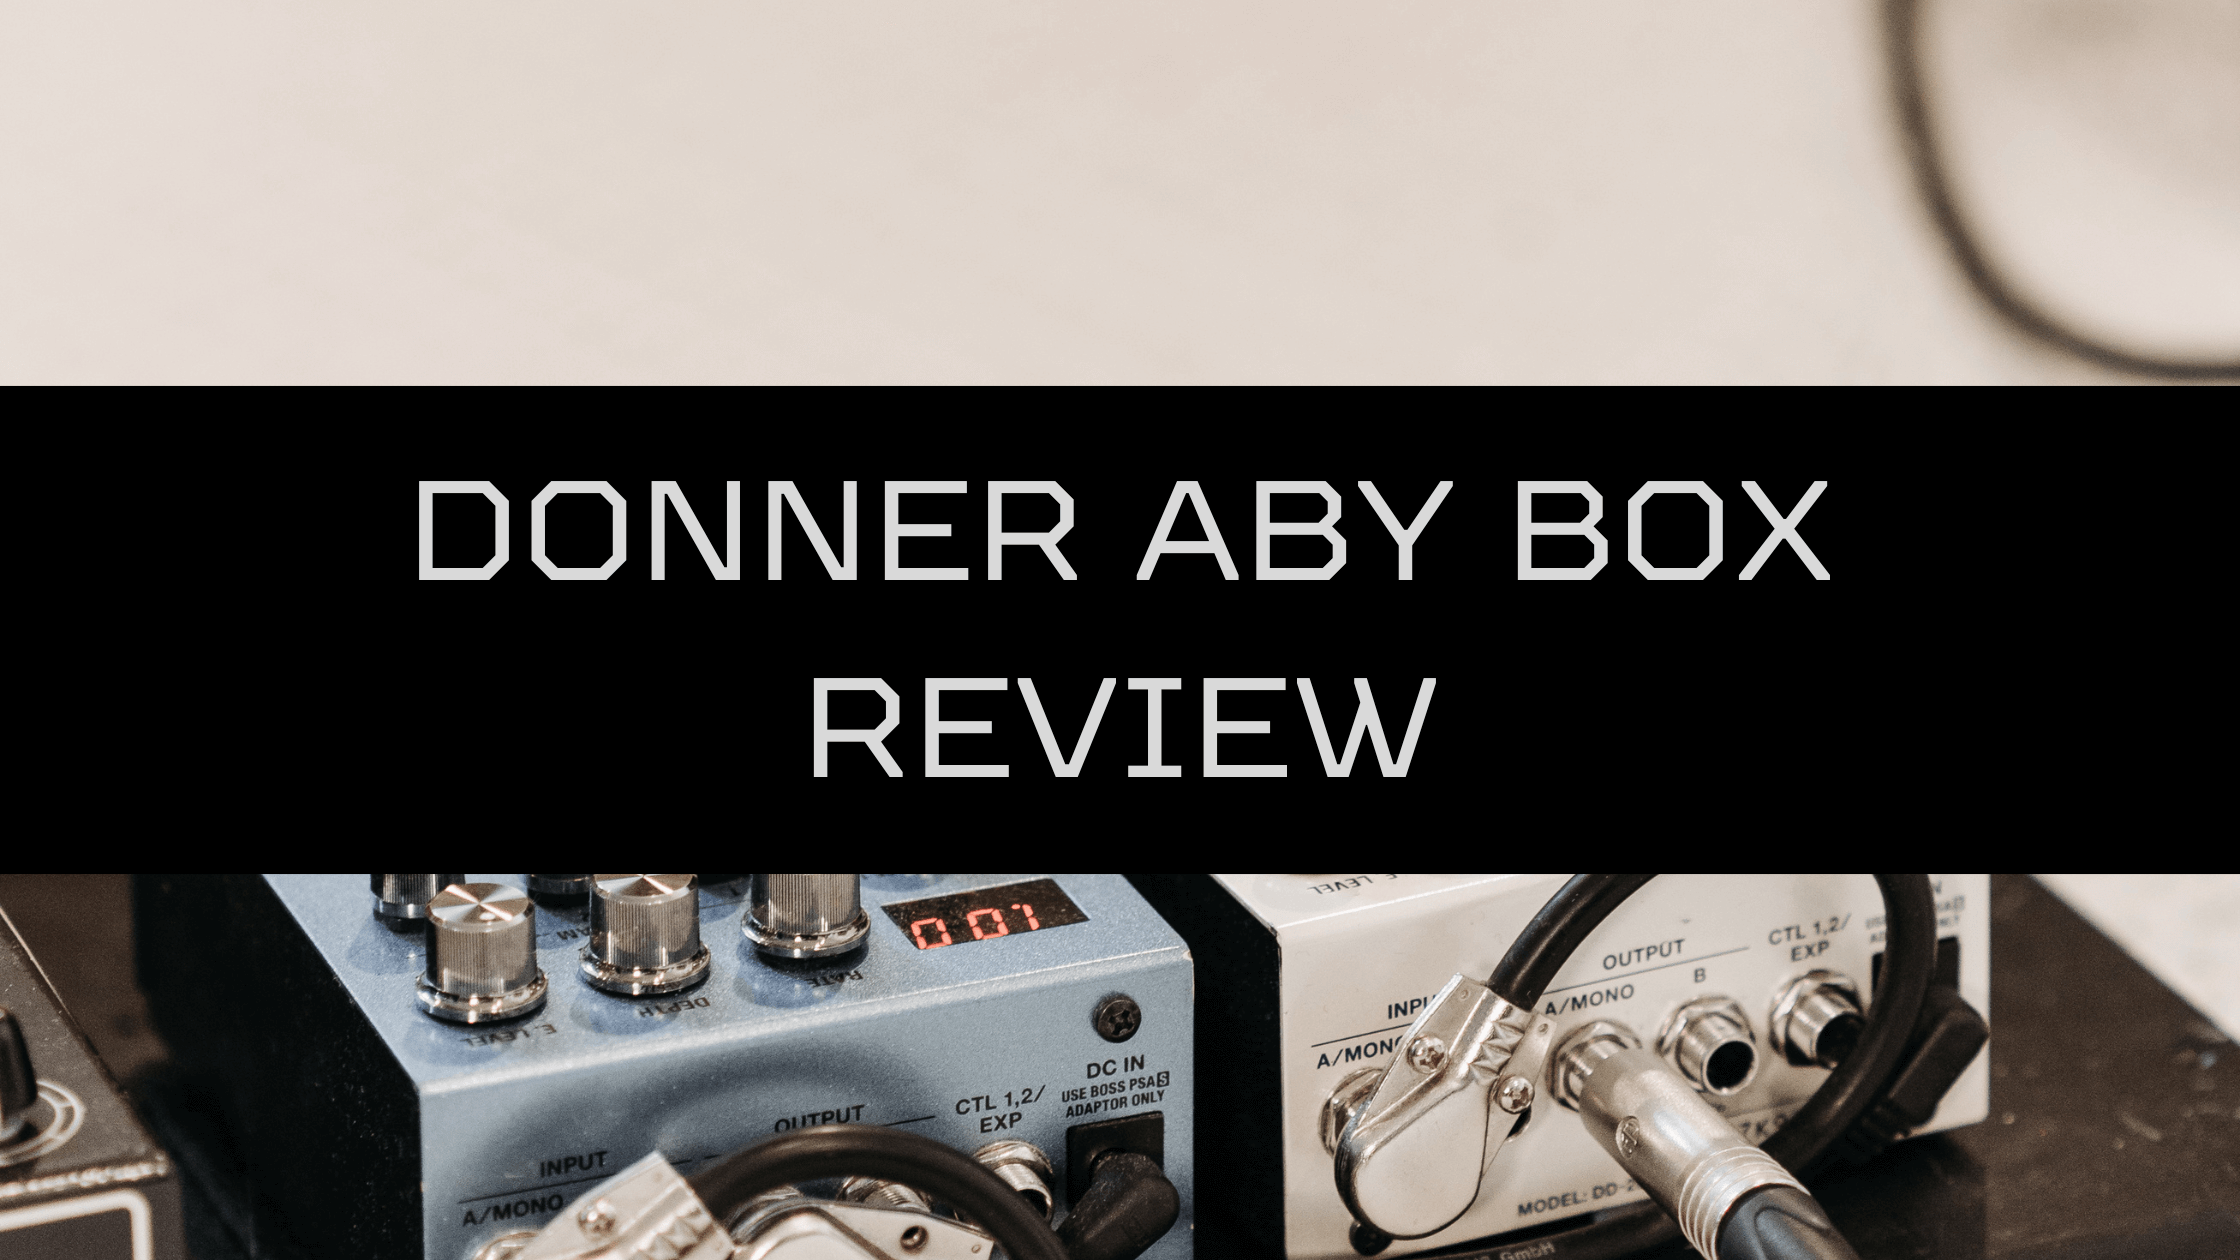 Donner ABY Box review